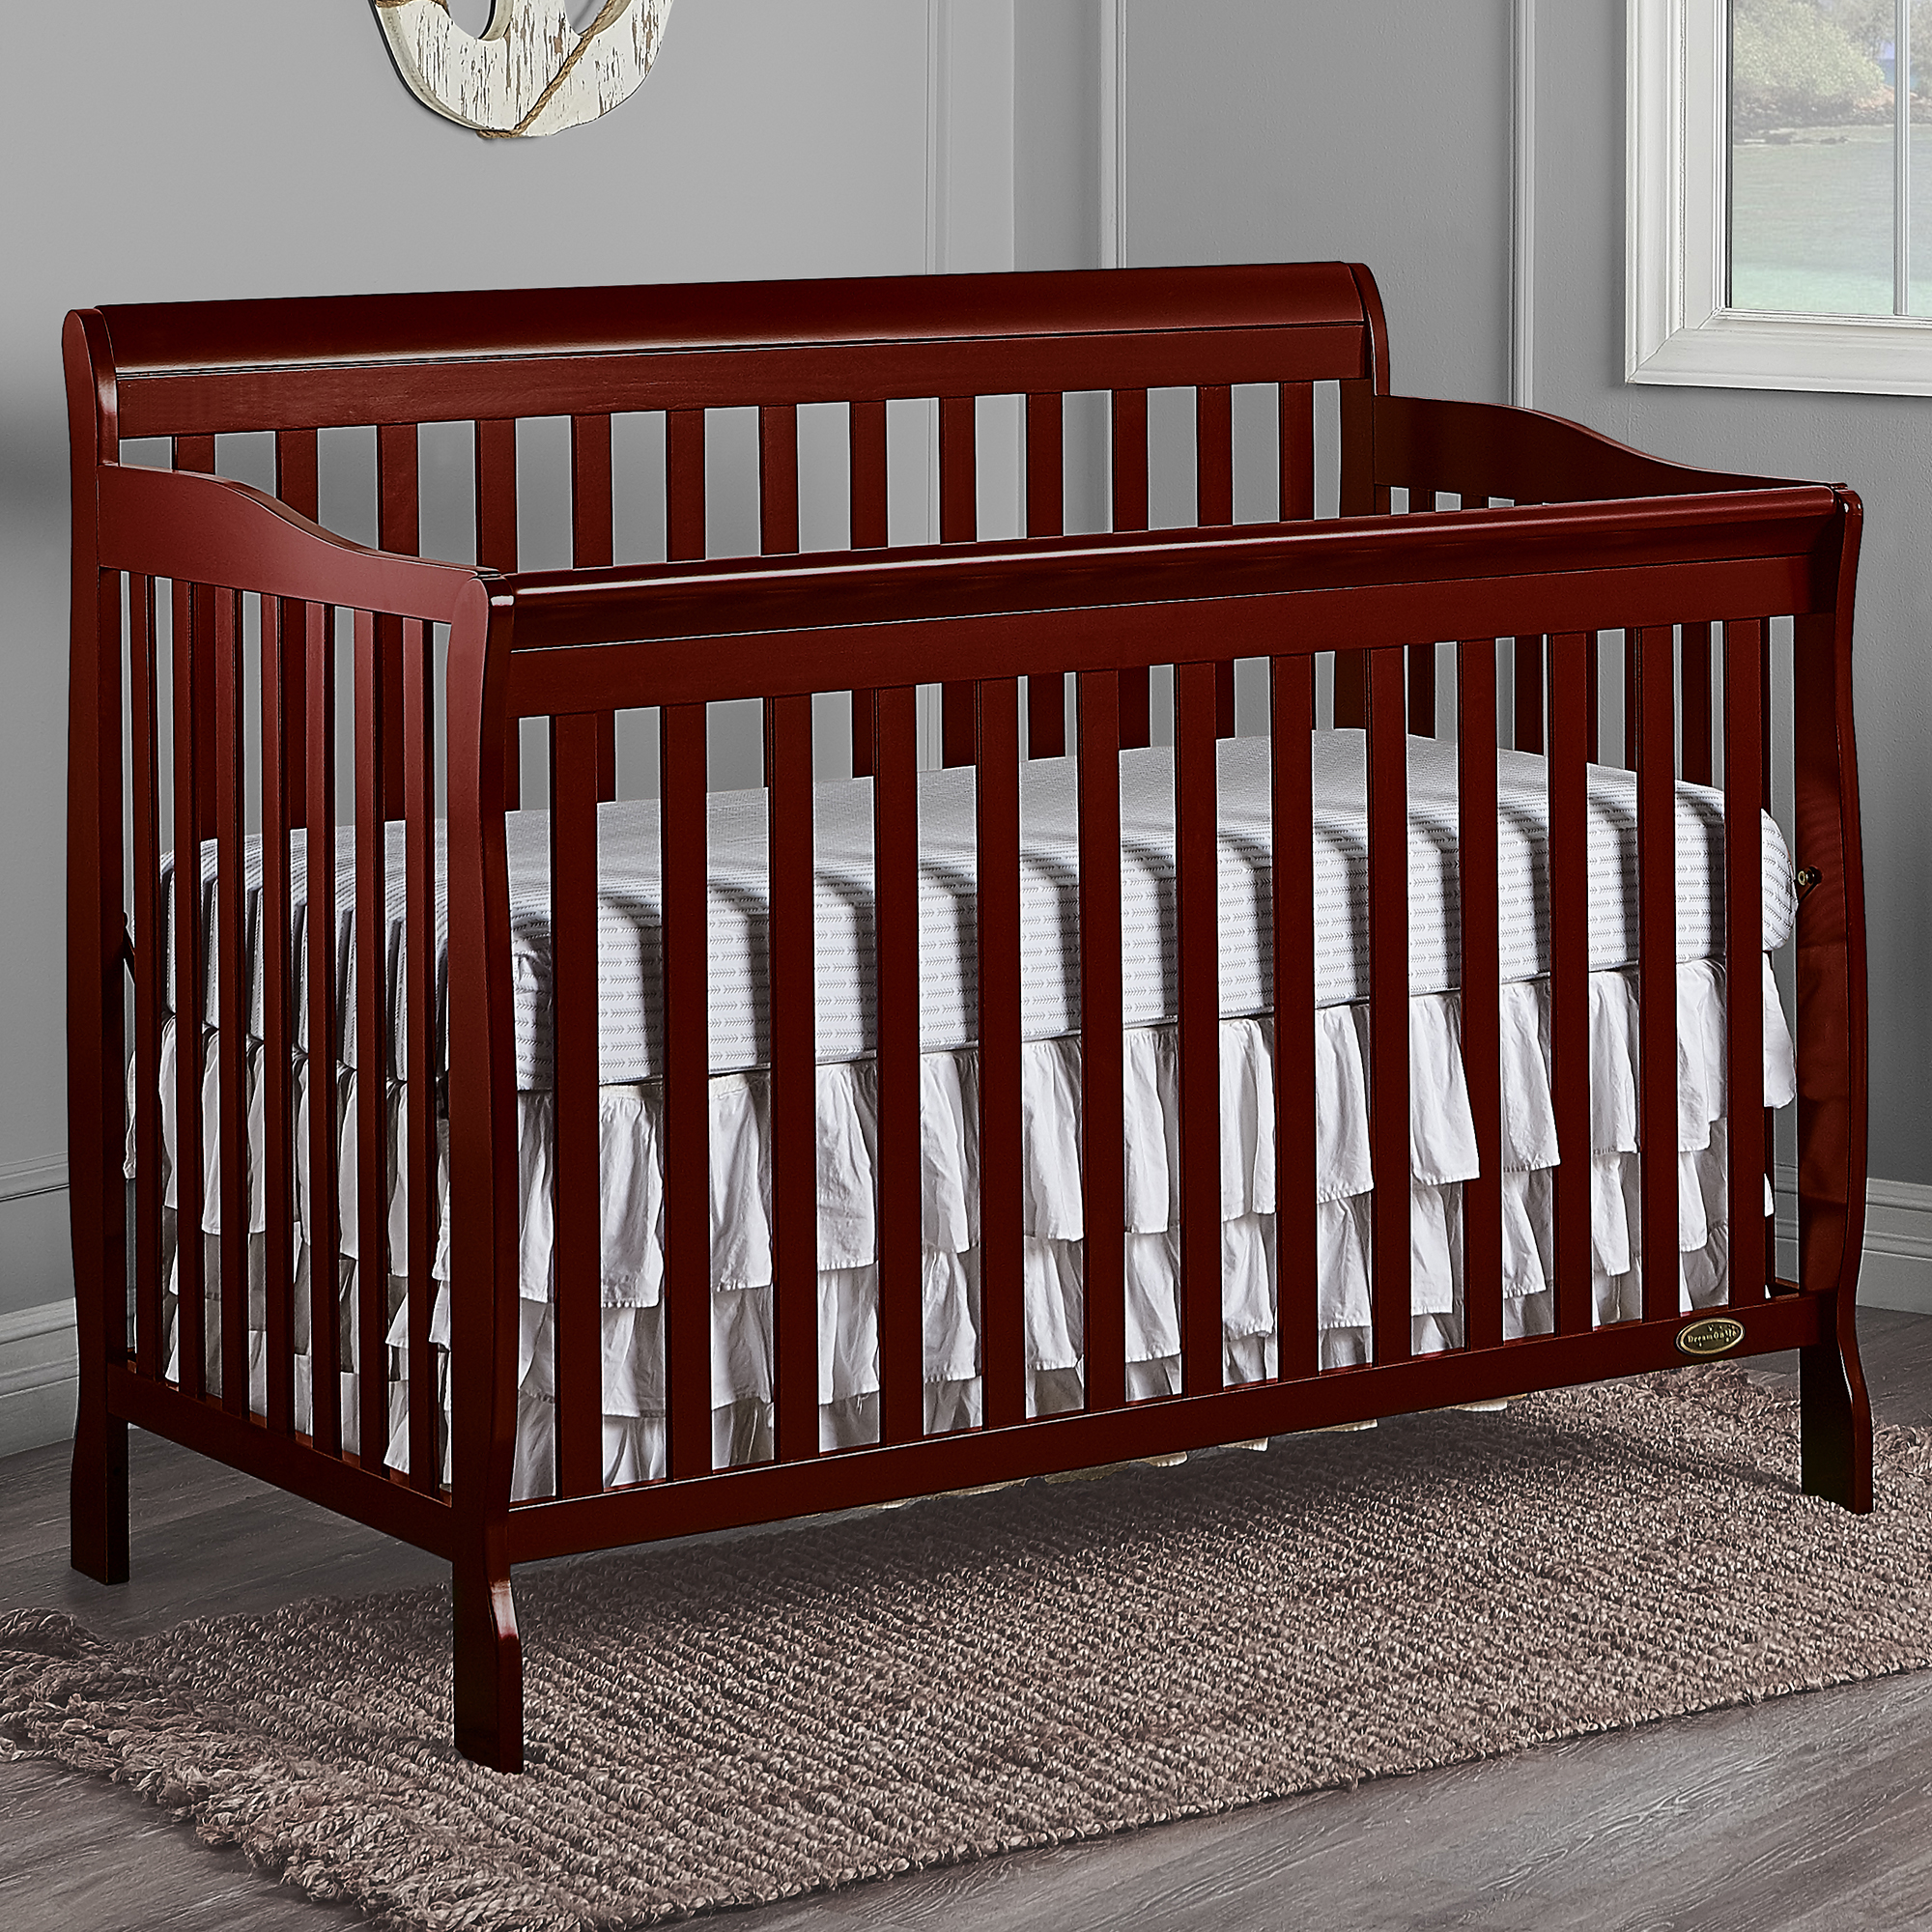 Dream On Me Ashton 5-in-1 Convertible Crib, Cherry, Greenguard Gold and JPMA Certified - image 5 of 15